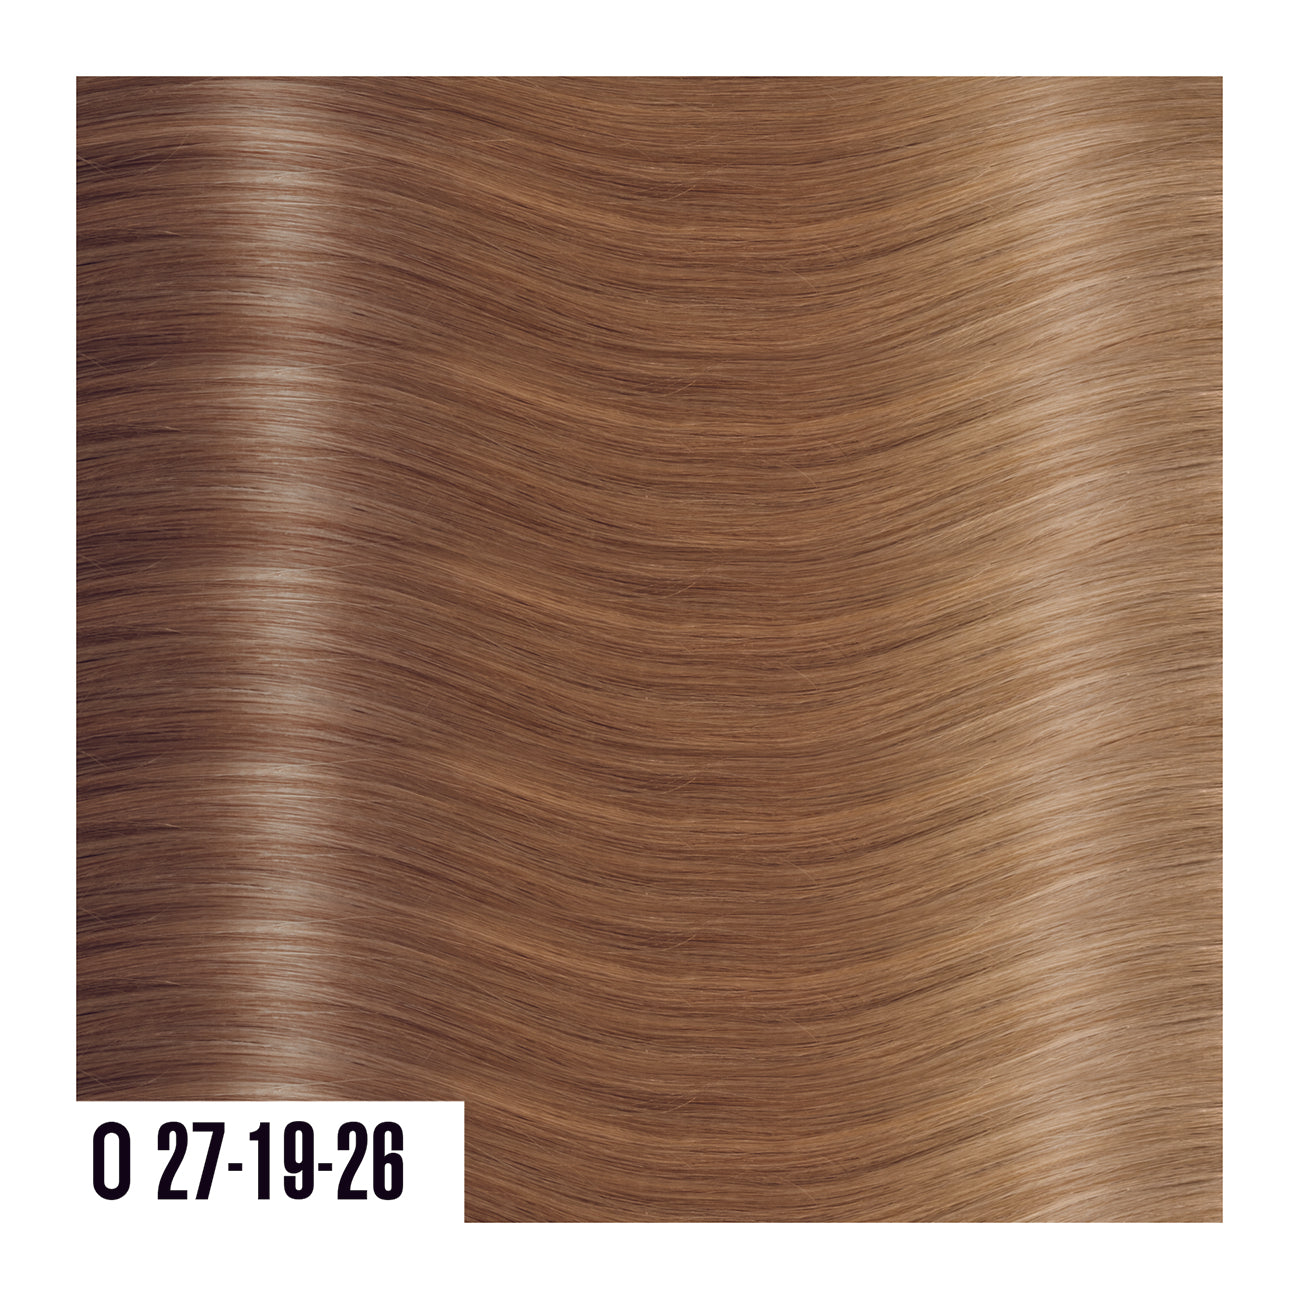 O27-19-26 - Prime Tape In Light Brown Fade Into Light Brown/Blonde - Ombre colors are a beautiful gradual blend of 3 colors with darker roots and lighter ends. 